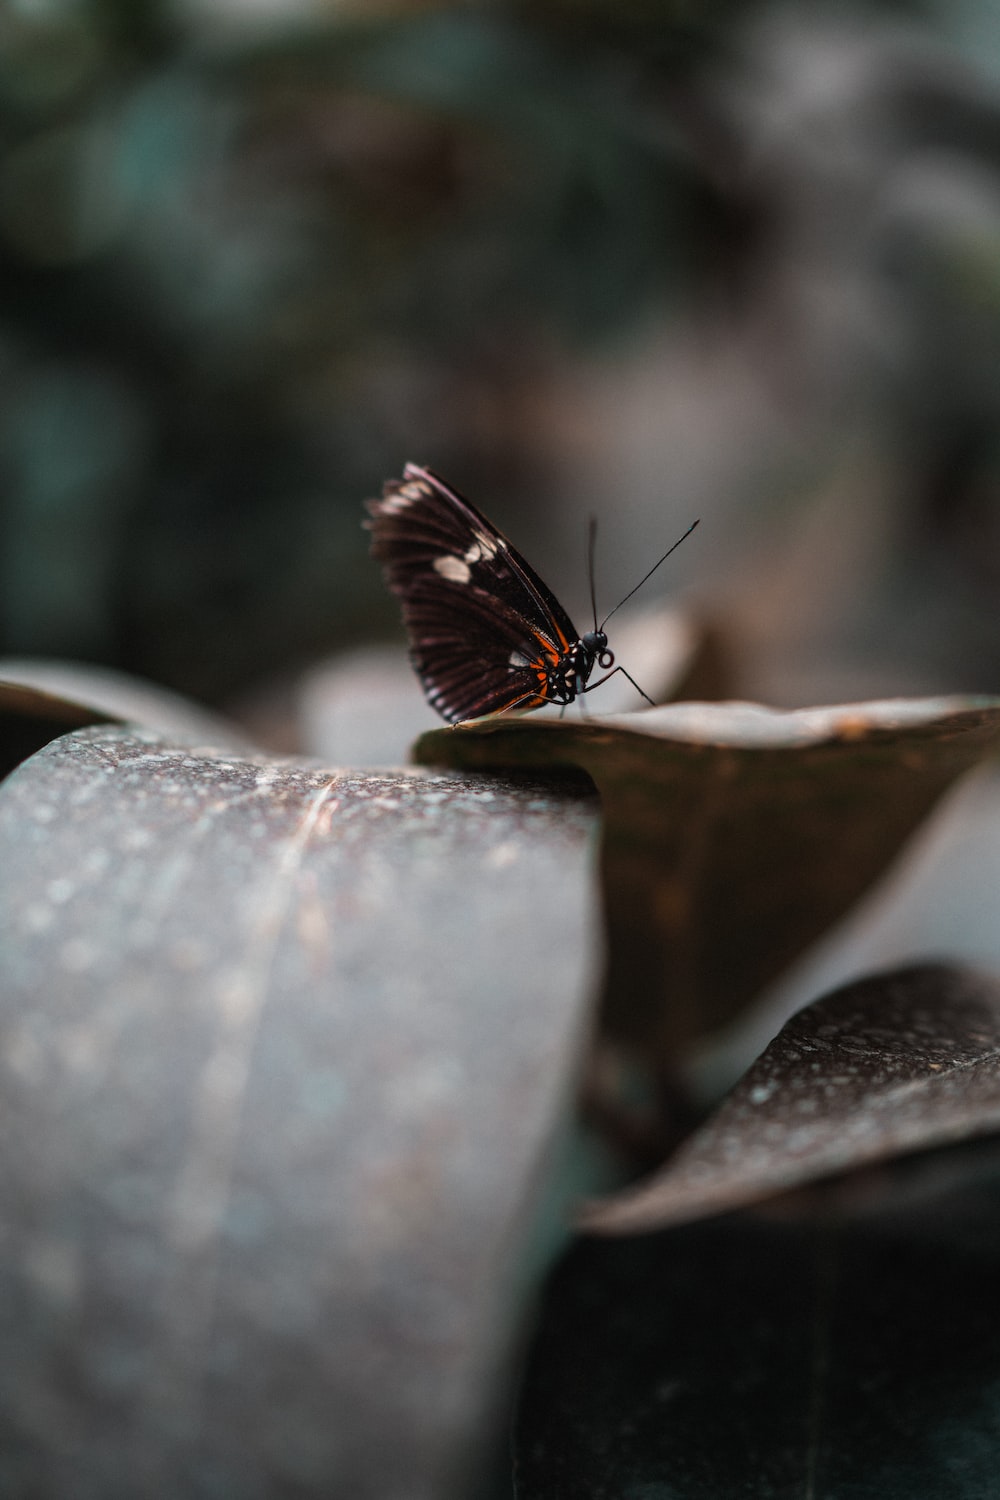 A butterfly on a leaf in the forest. - Butterfly